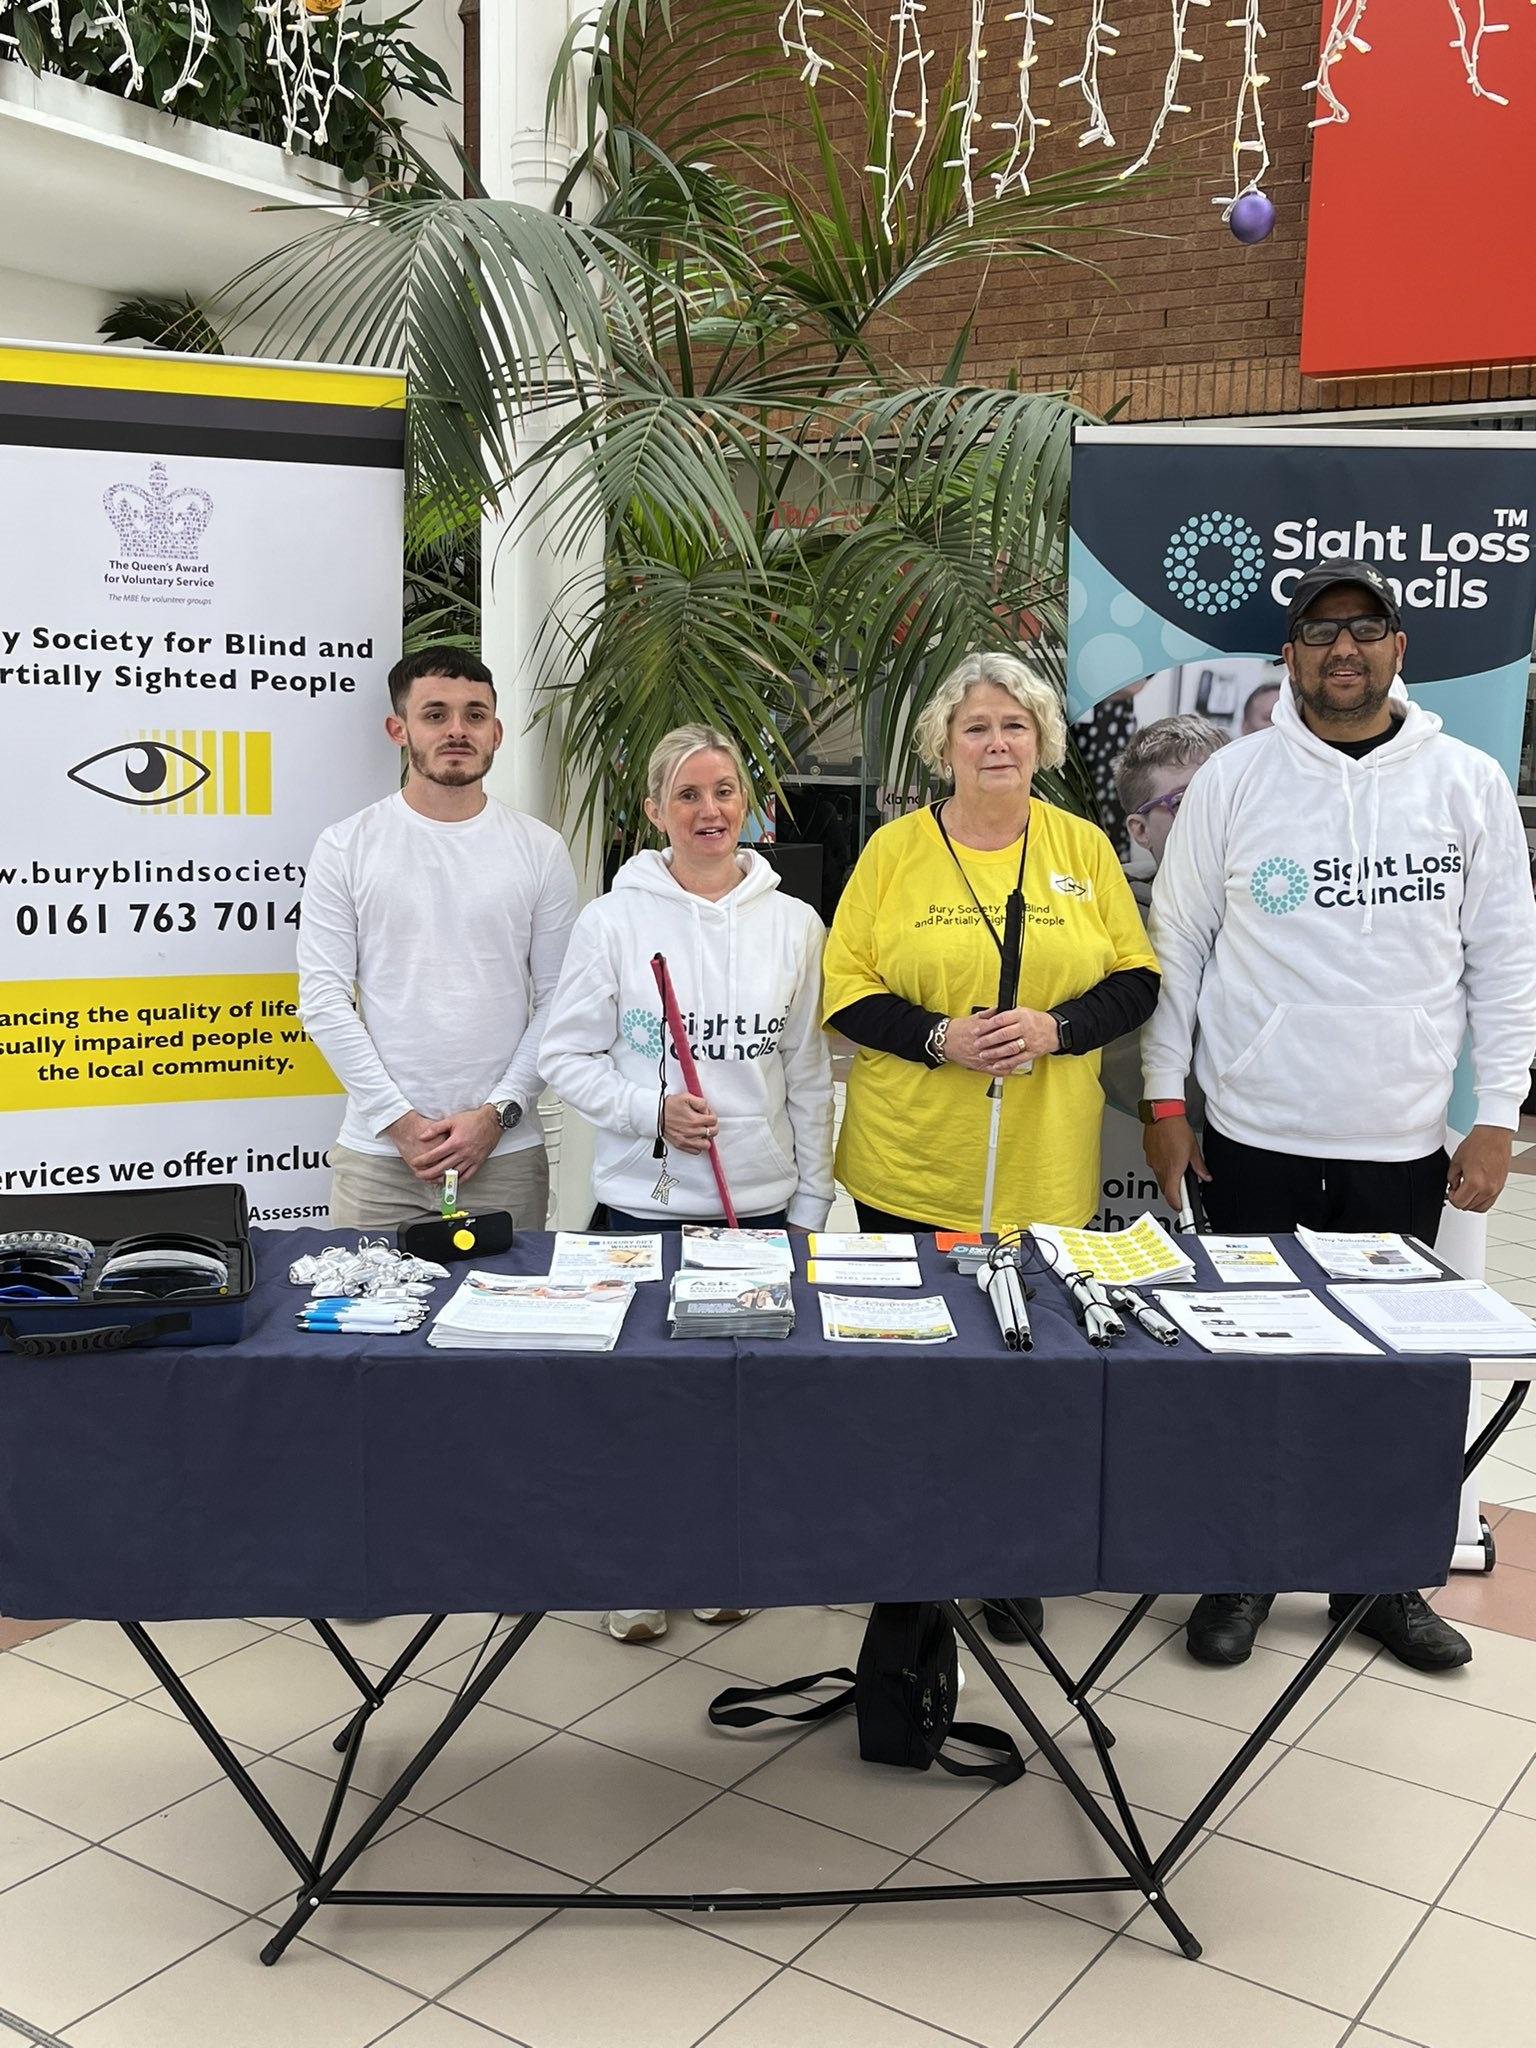 From left to right: David Parfett, SLC coordinator for North West England, Kelly Barton, Engagement Manager for North West England, Gill Currie, Bury Blind Society, and Abu, Greater Manchester SLC member.